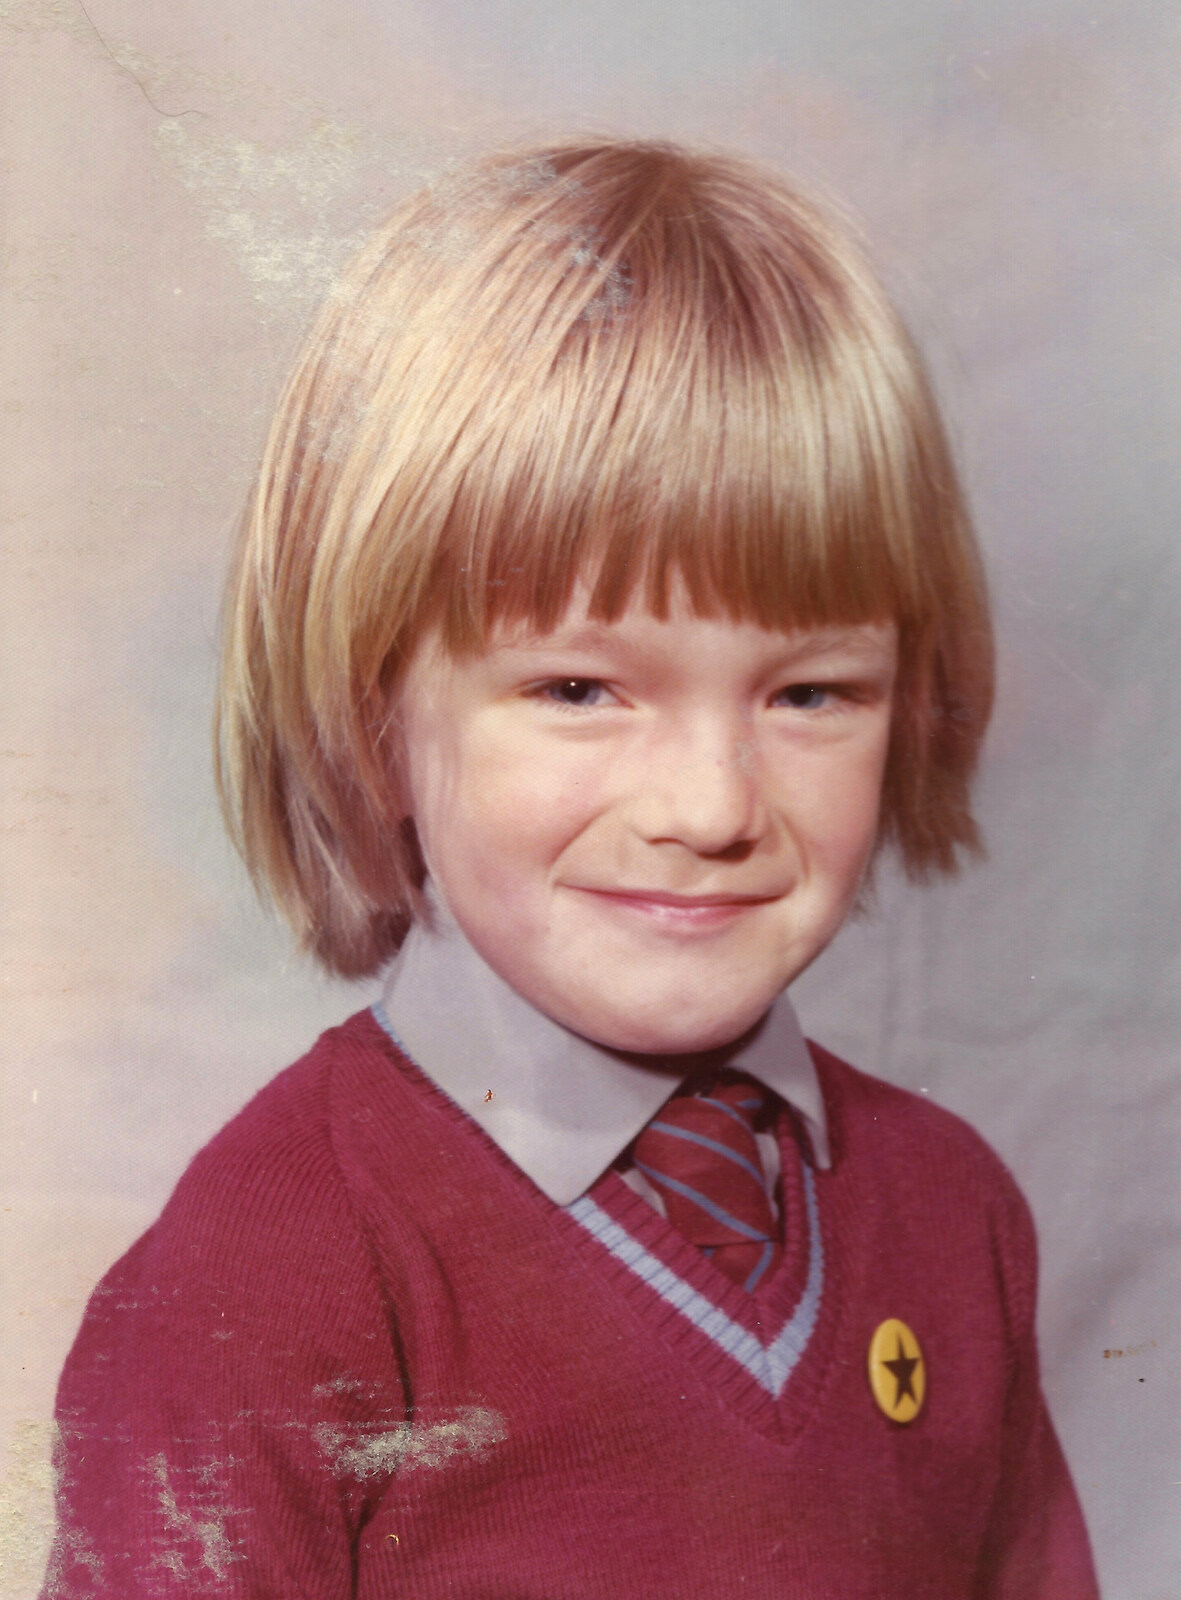 School photo from Family History: The 1970s, Timperley and Sandbach, Cheshire - 24th January 2020